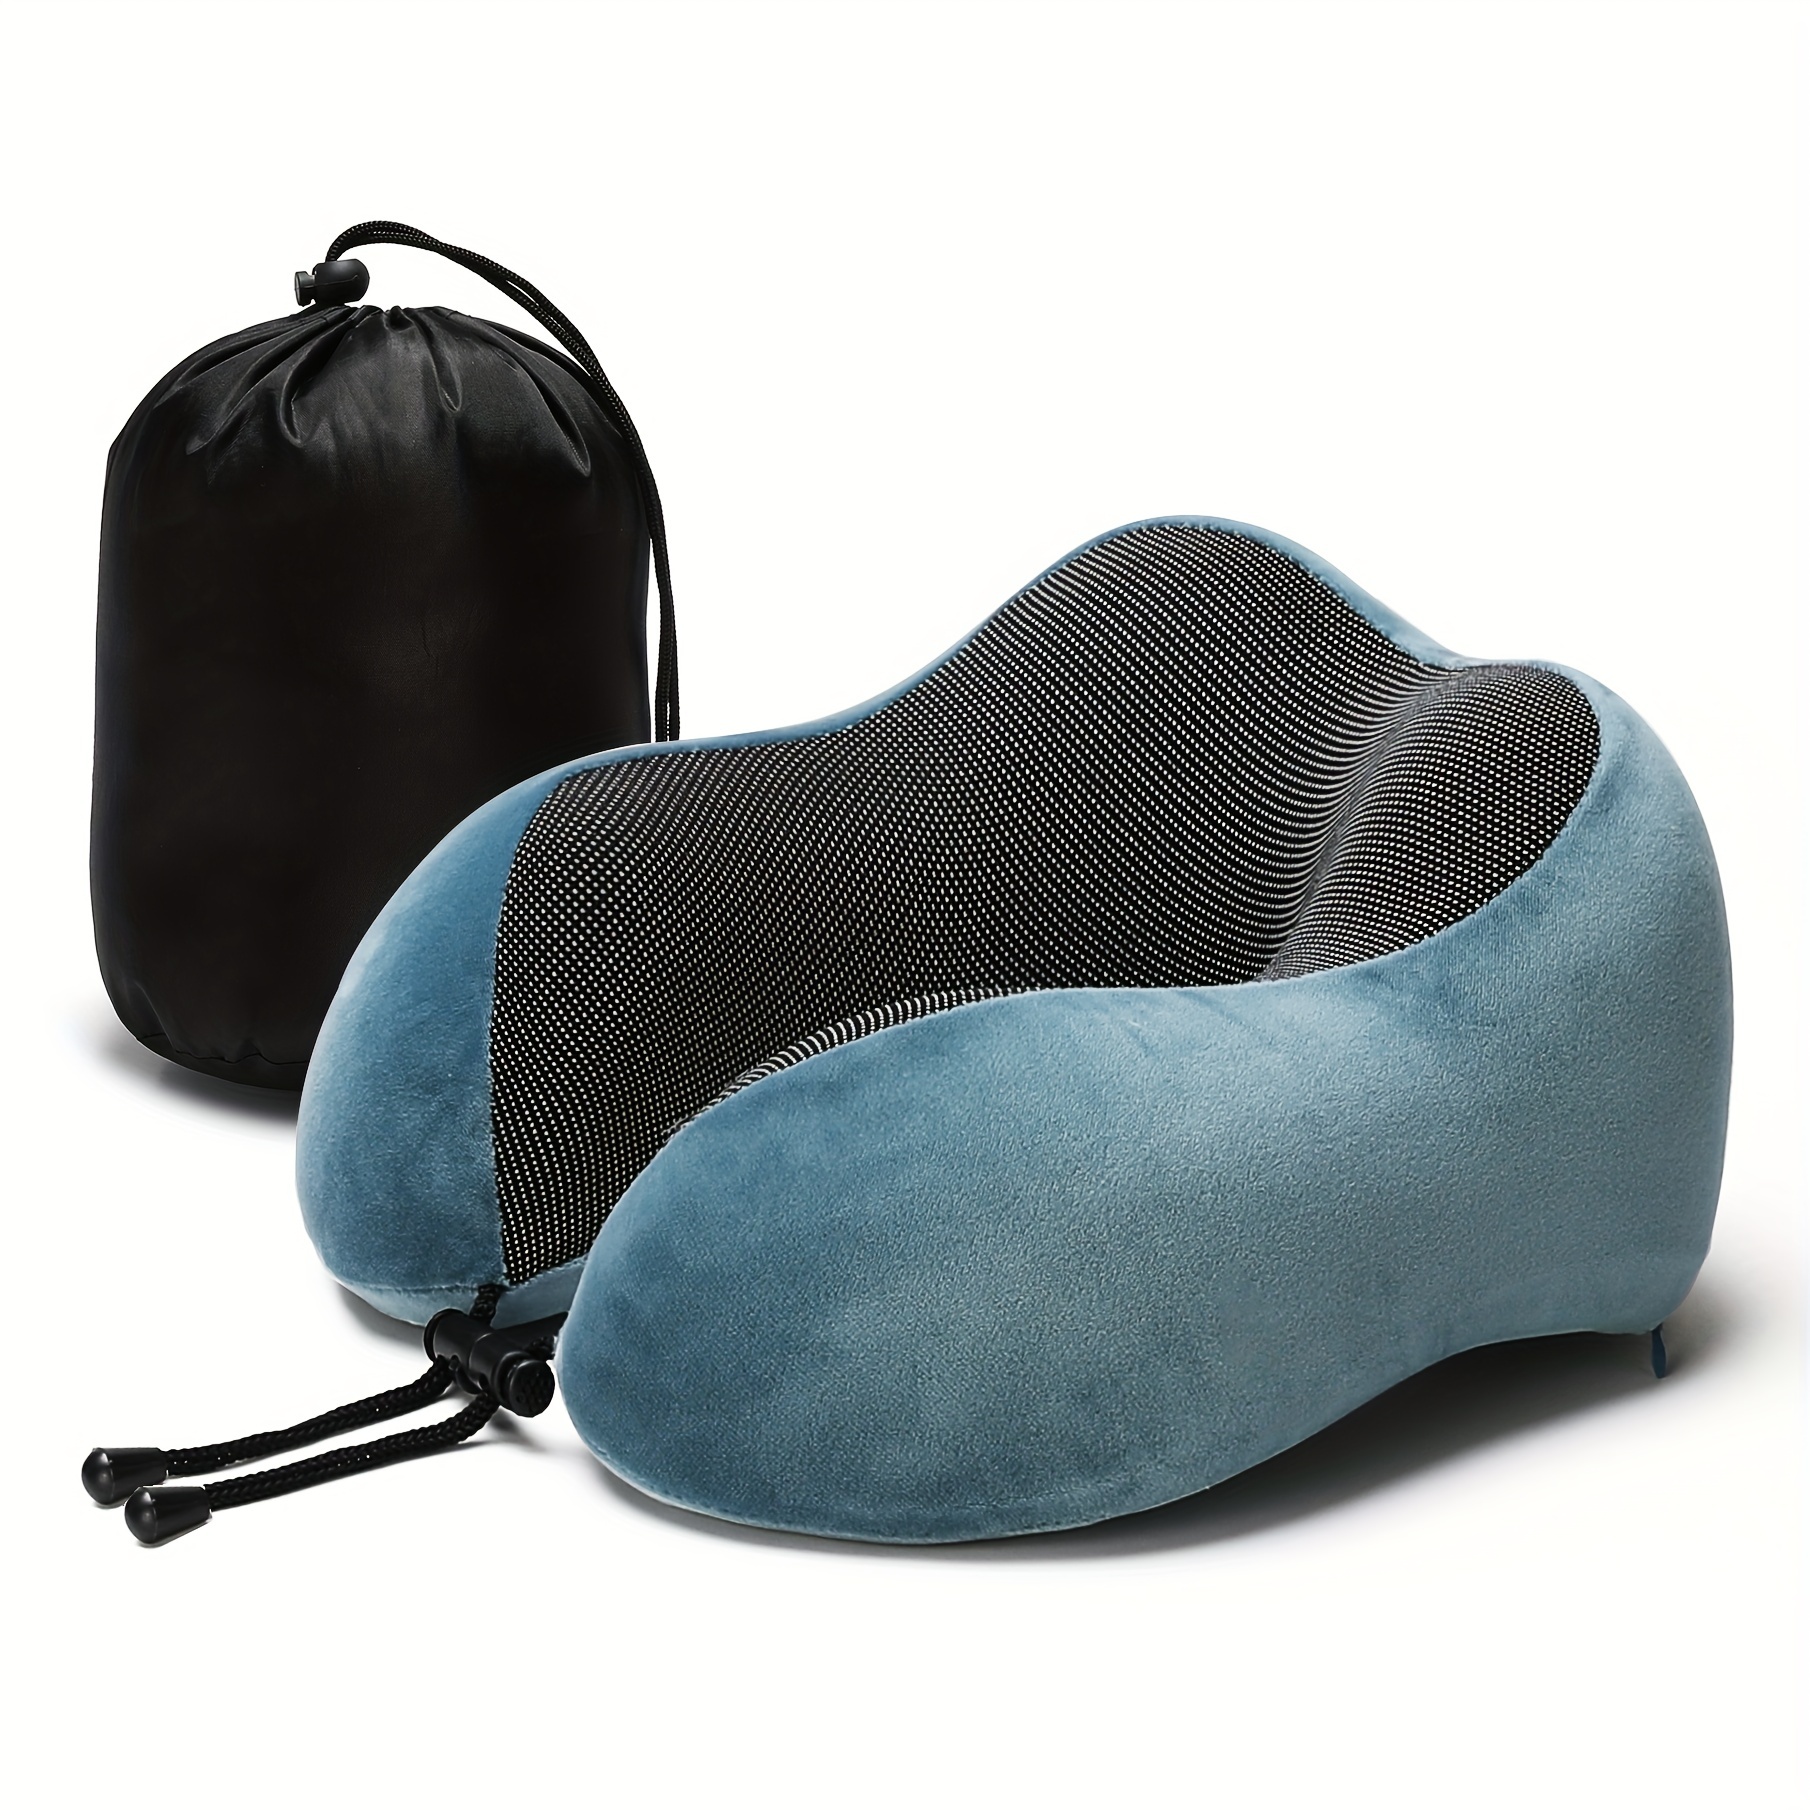 Pillow U-shaped Hump Traveler's Neck Is Soft, Breathable And